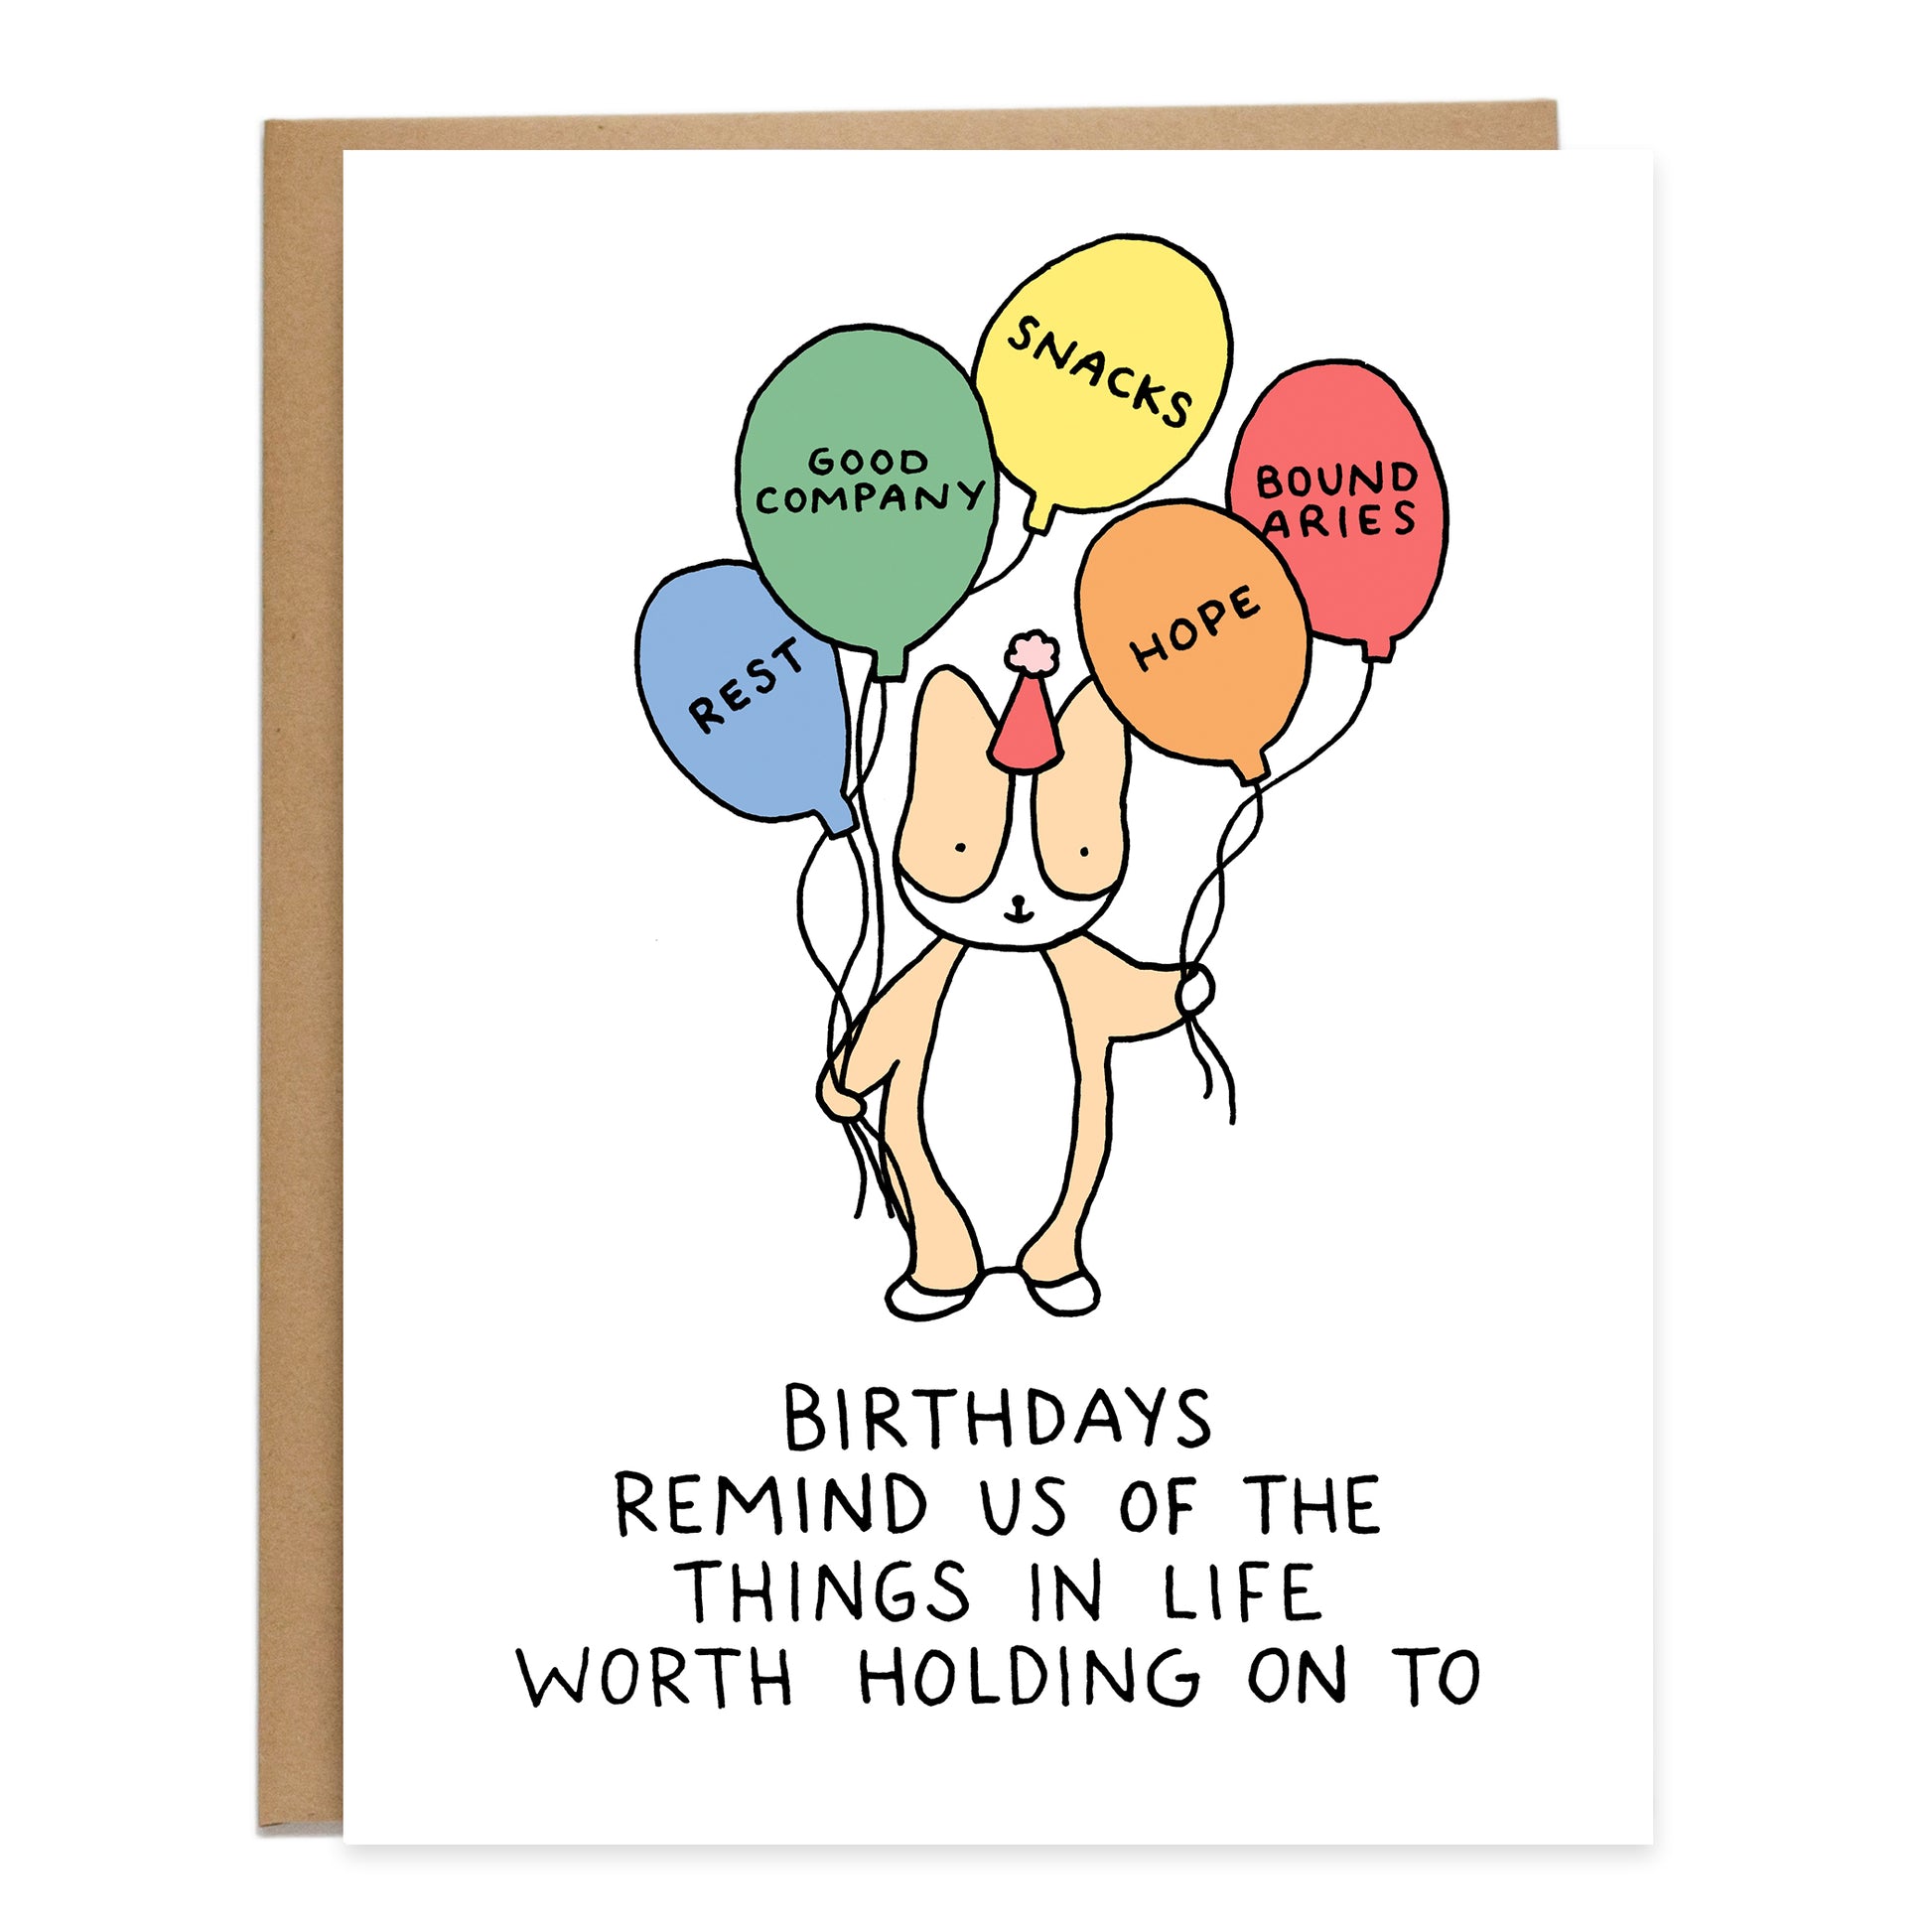 corgi holding balloons that read: rest, good company, snacks, hope, and boundaries, text on card reads: birthdays remind us of the things in life worth holding on to